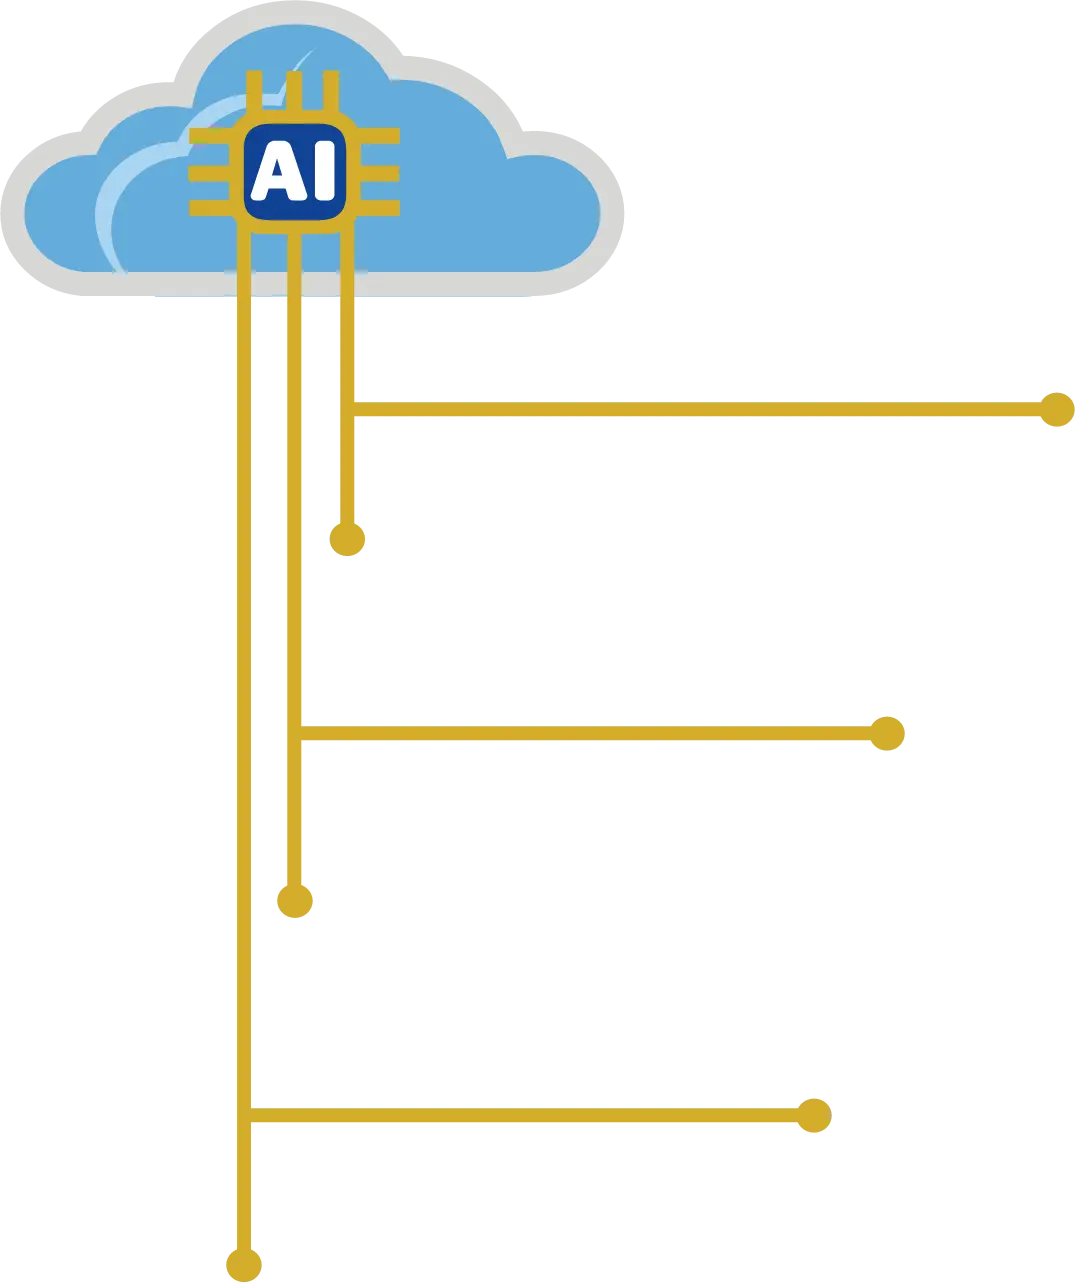 Cloud and AI symbol icon representing diverse consultation styles in BuildersMeet AI Consultation